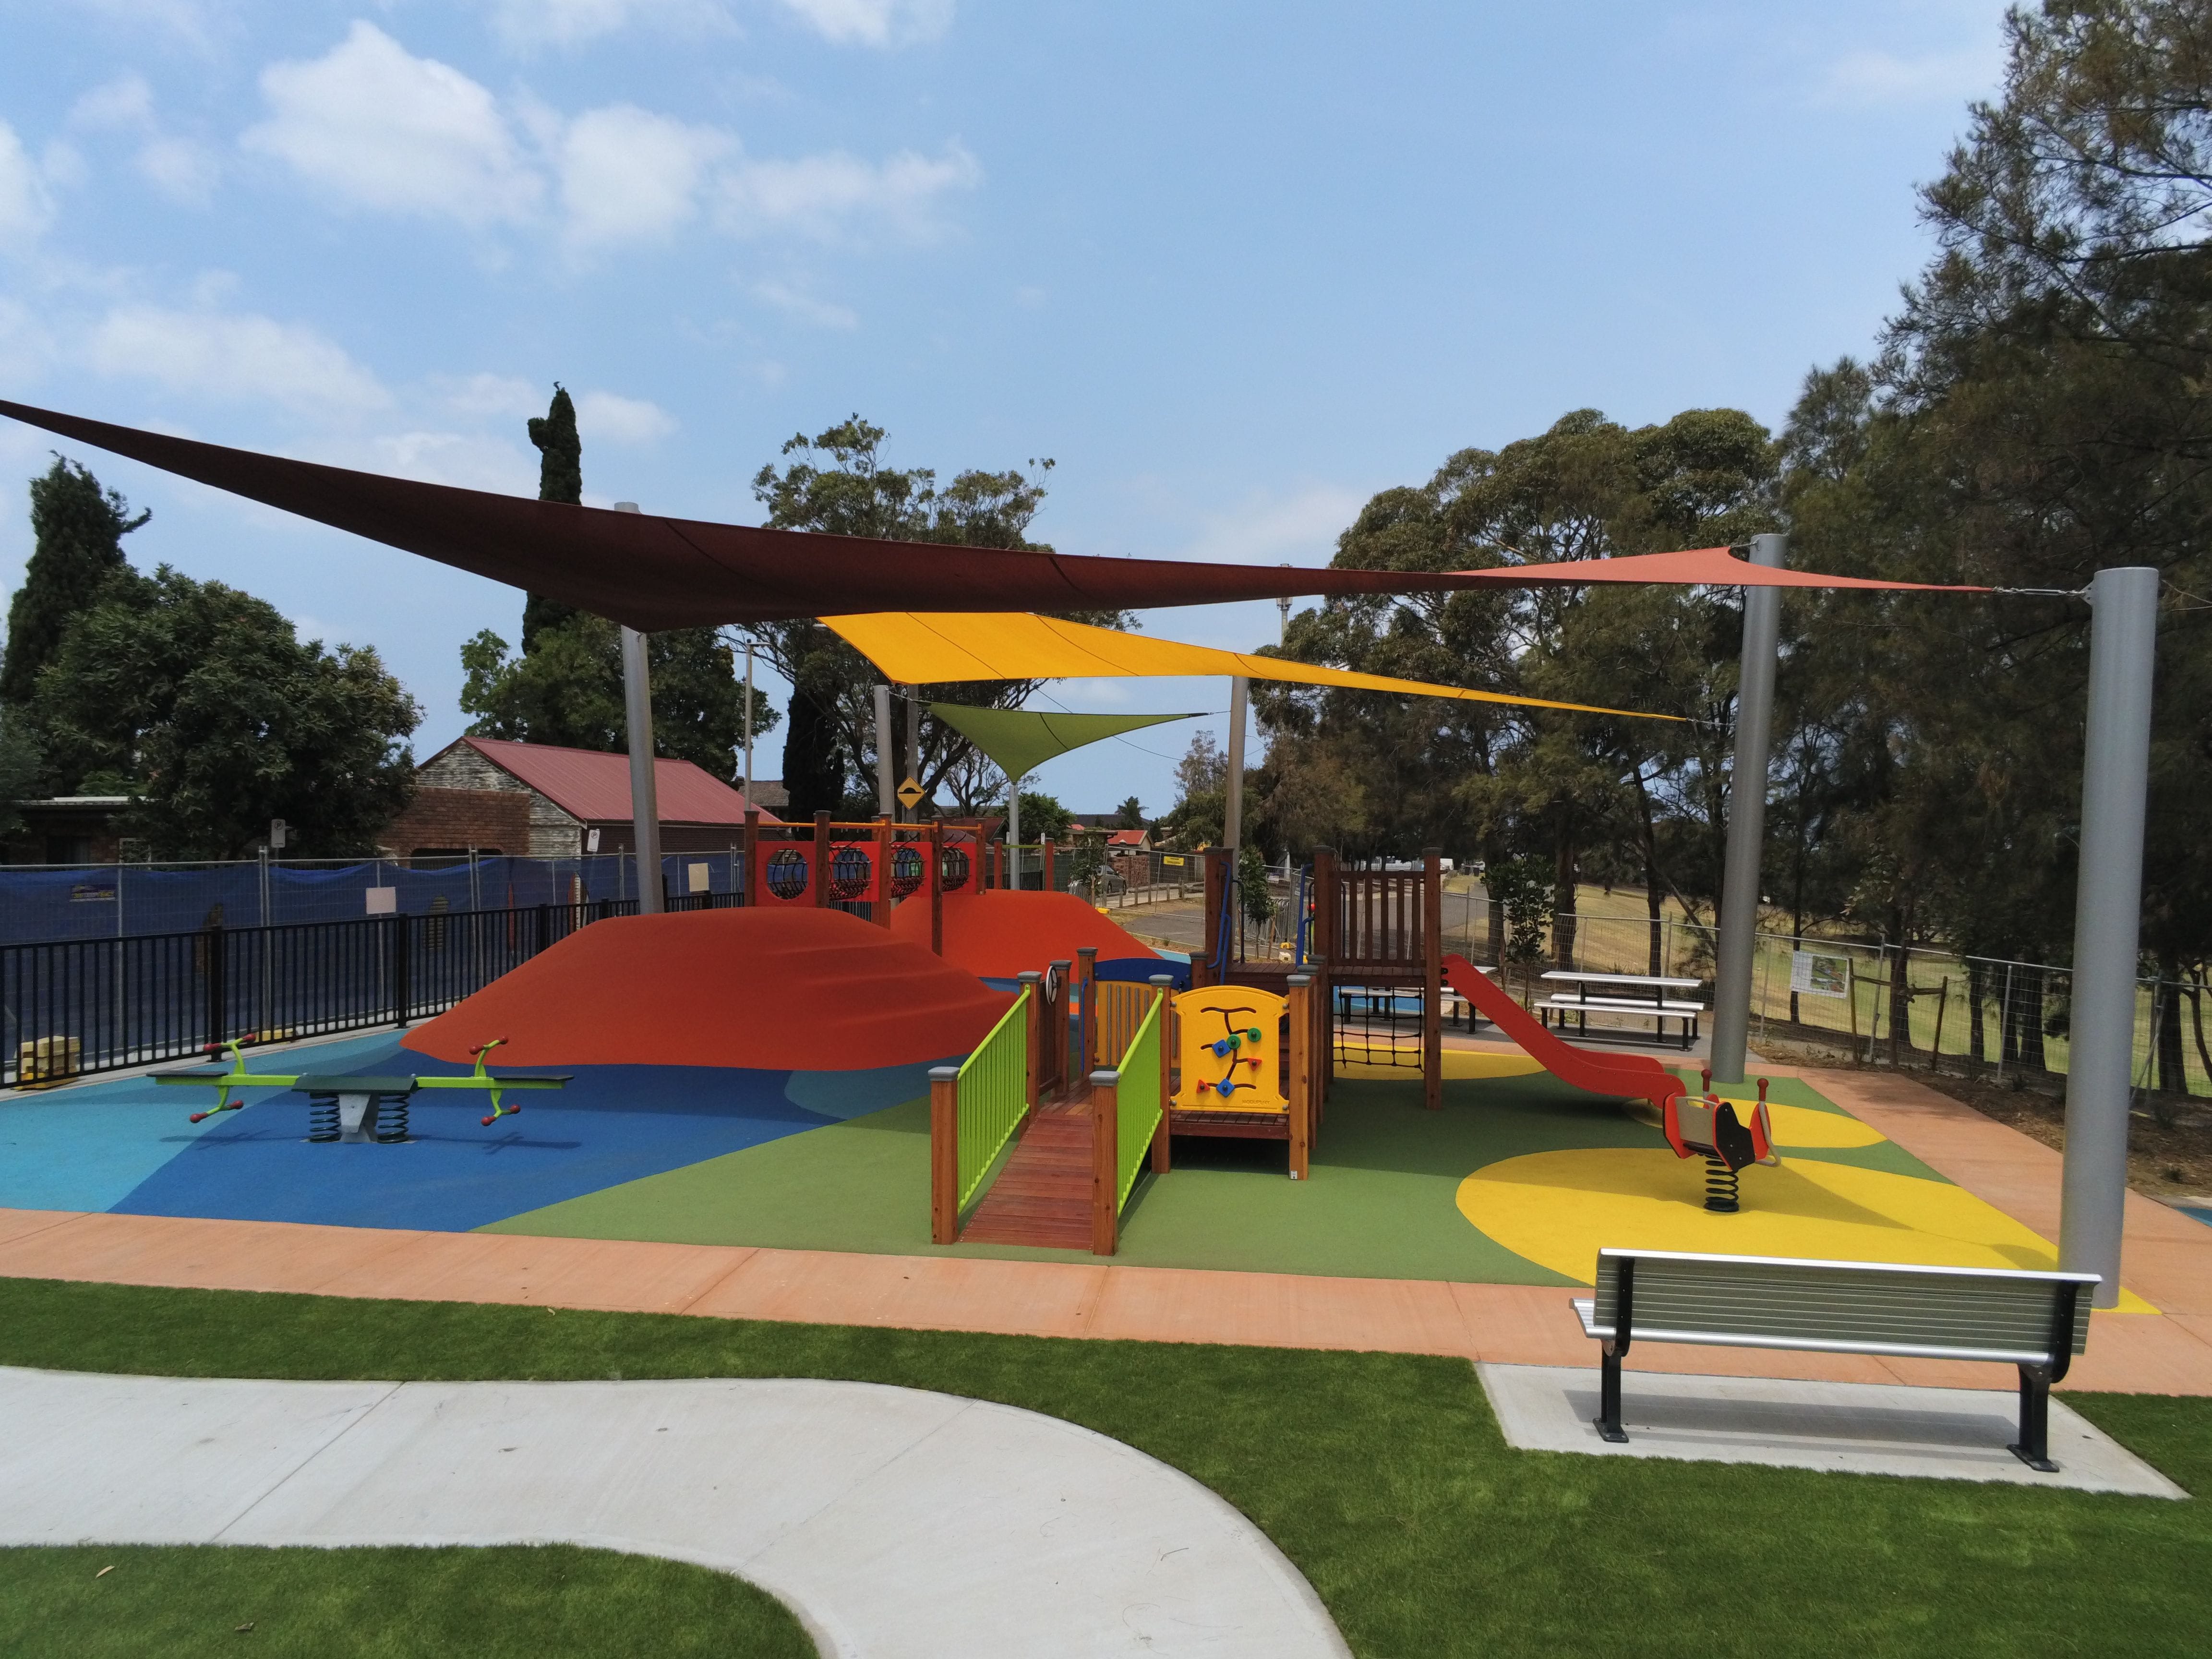 Australian Sports & Safety Surfaces - Inclusive Adventure Playground and Bike Training Circuit at Kempt Field Image -5df978fcbe0a7